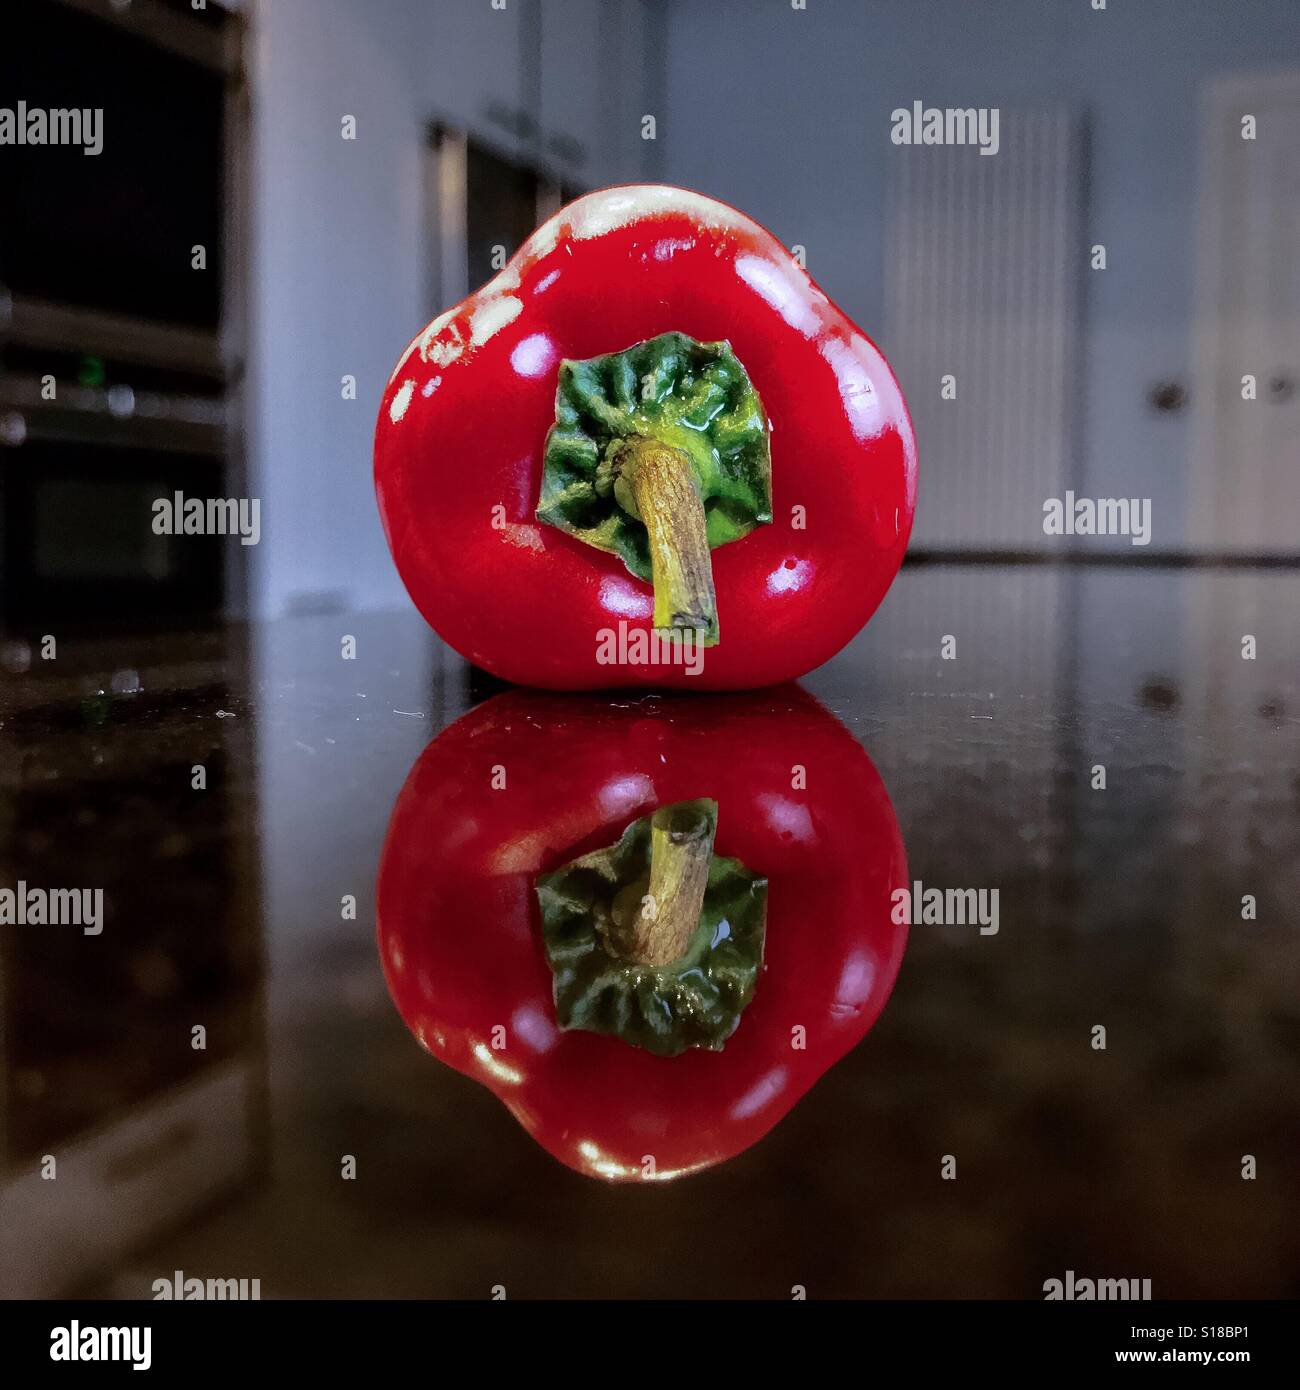 Red pepper reflection Stock Photo